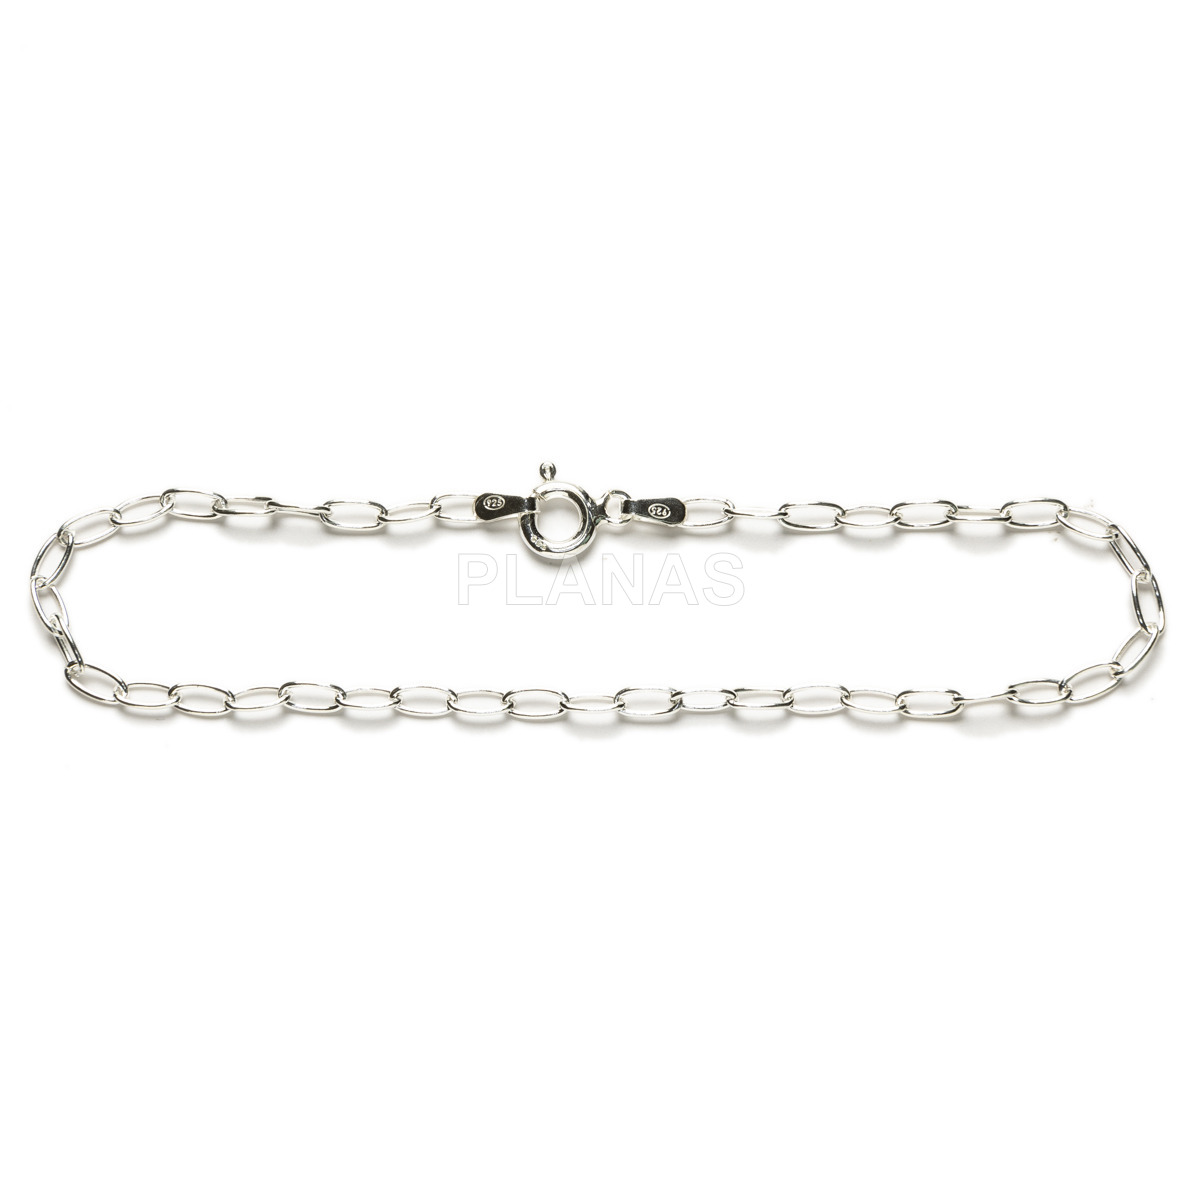 Forced chain or bracelet in sterling silver. 3x5mm.